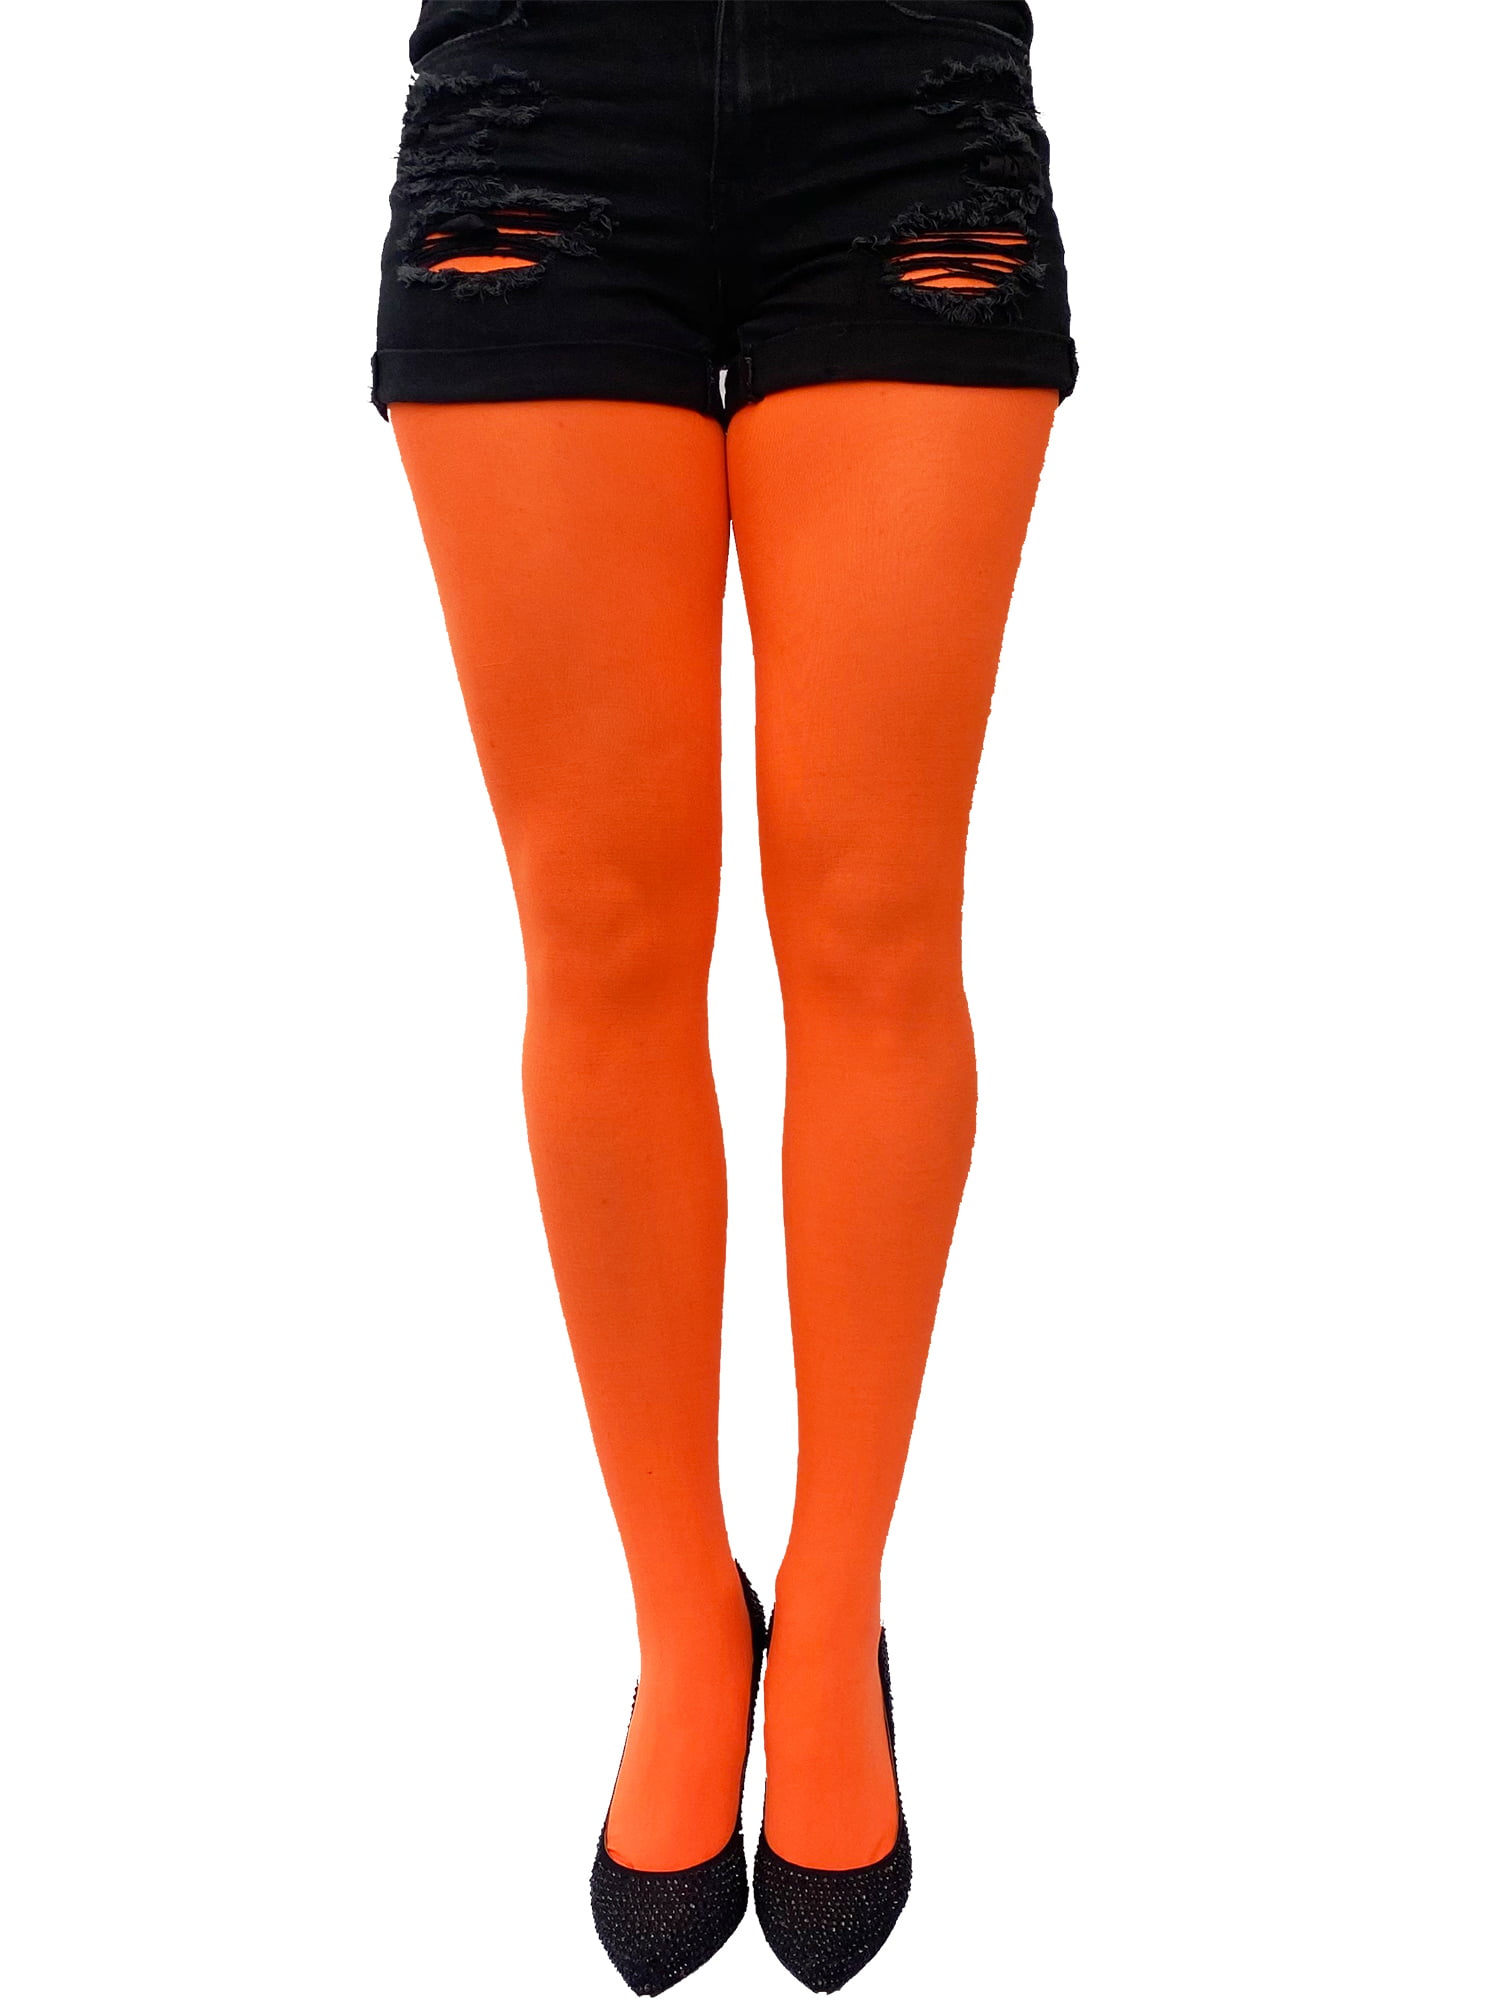 Neon Orange Opaque Full Footed Tights, Pantyhose for Women